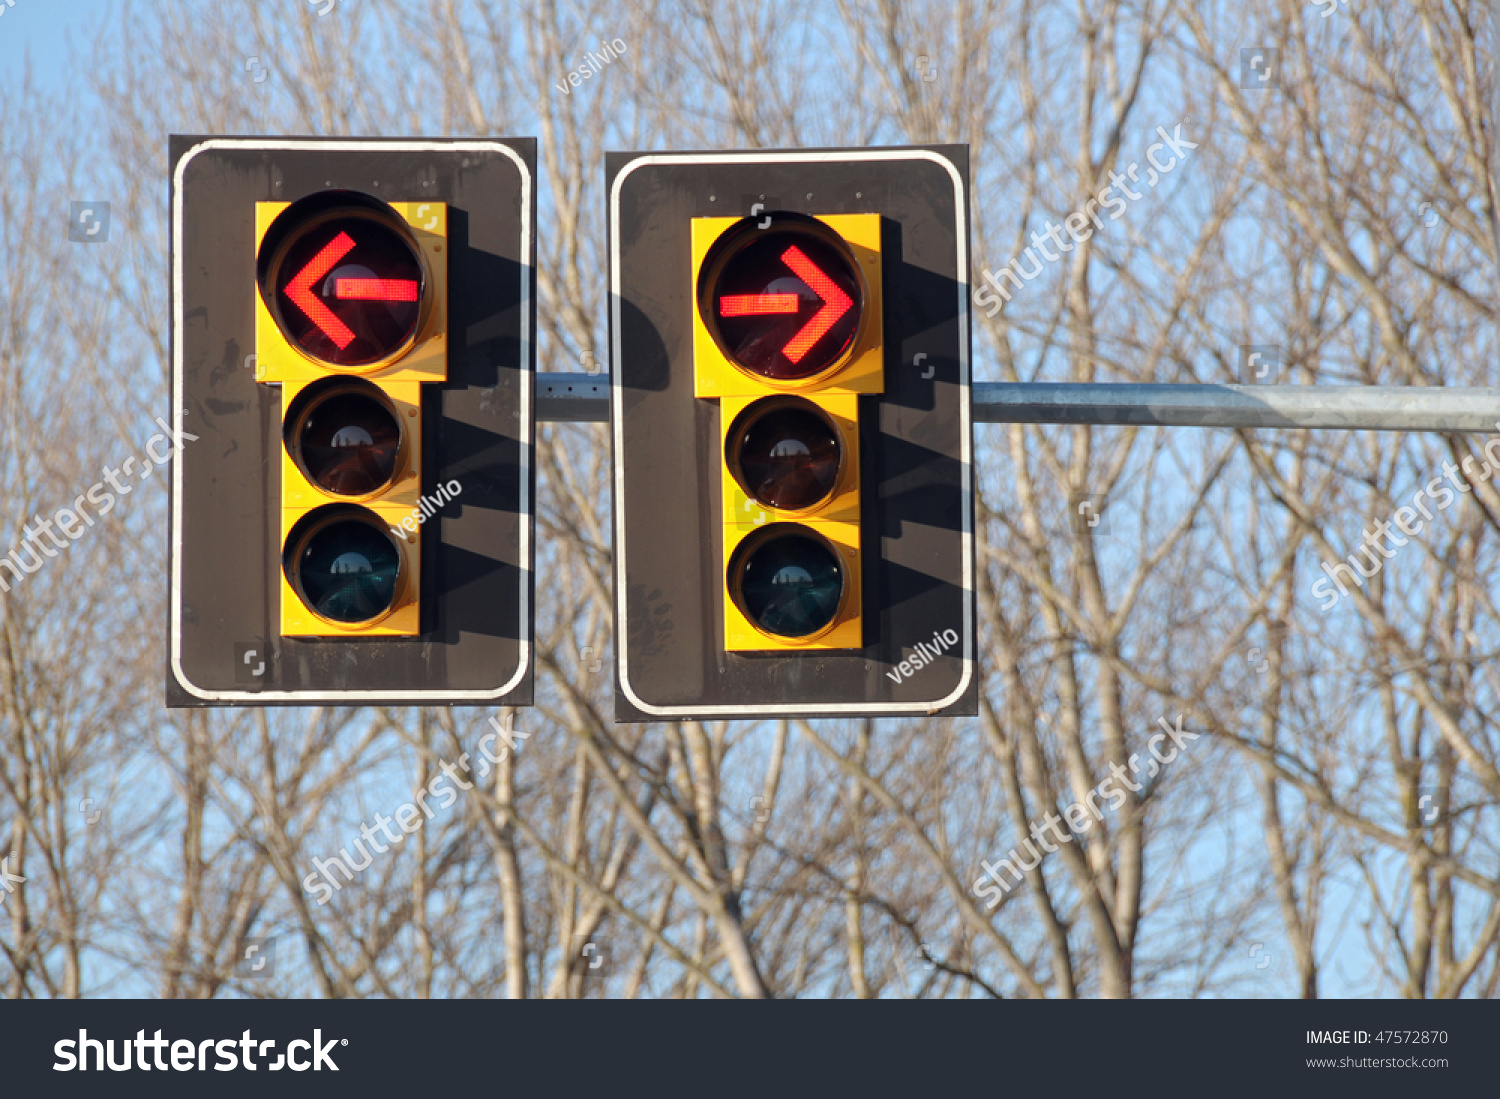 stock-photo-traffic-lights-with-red-arrow-to-ban-both-left-and-right-turn-47572870.jpg